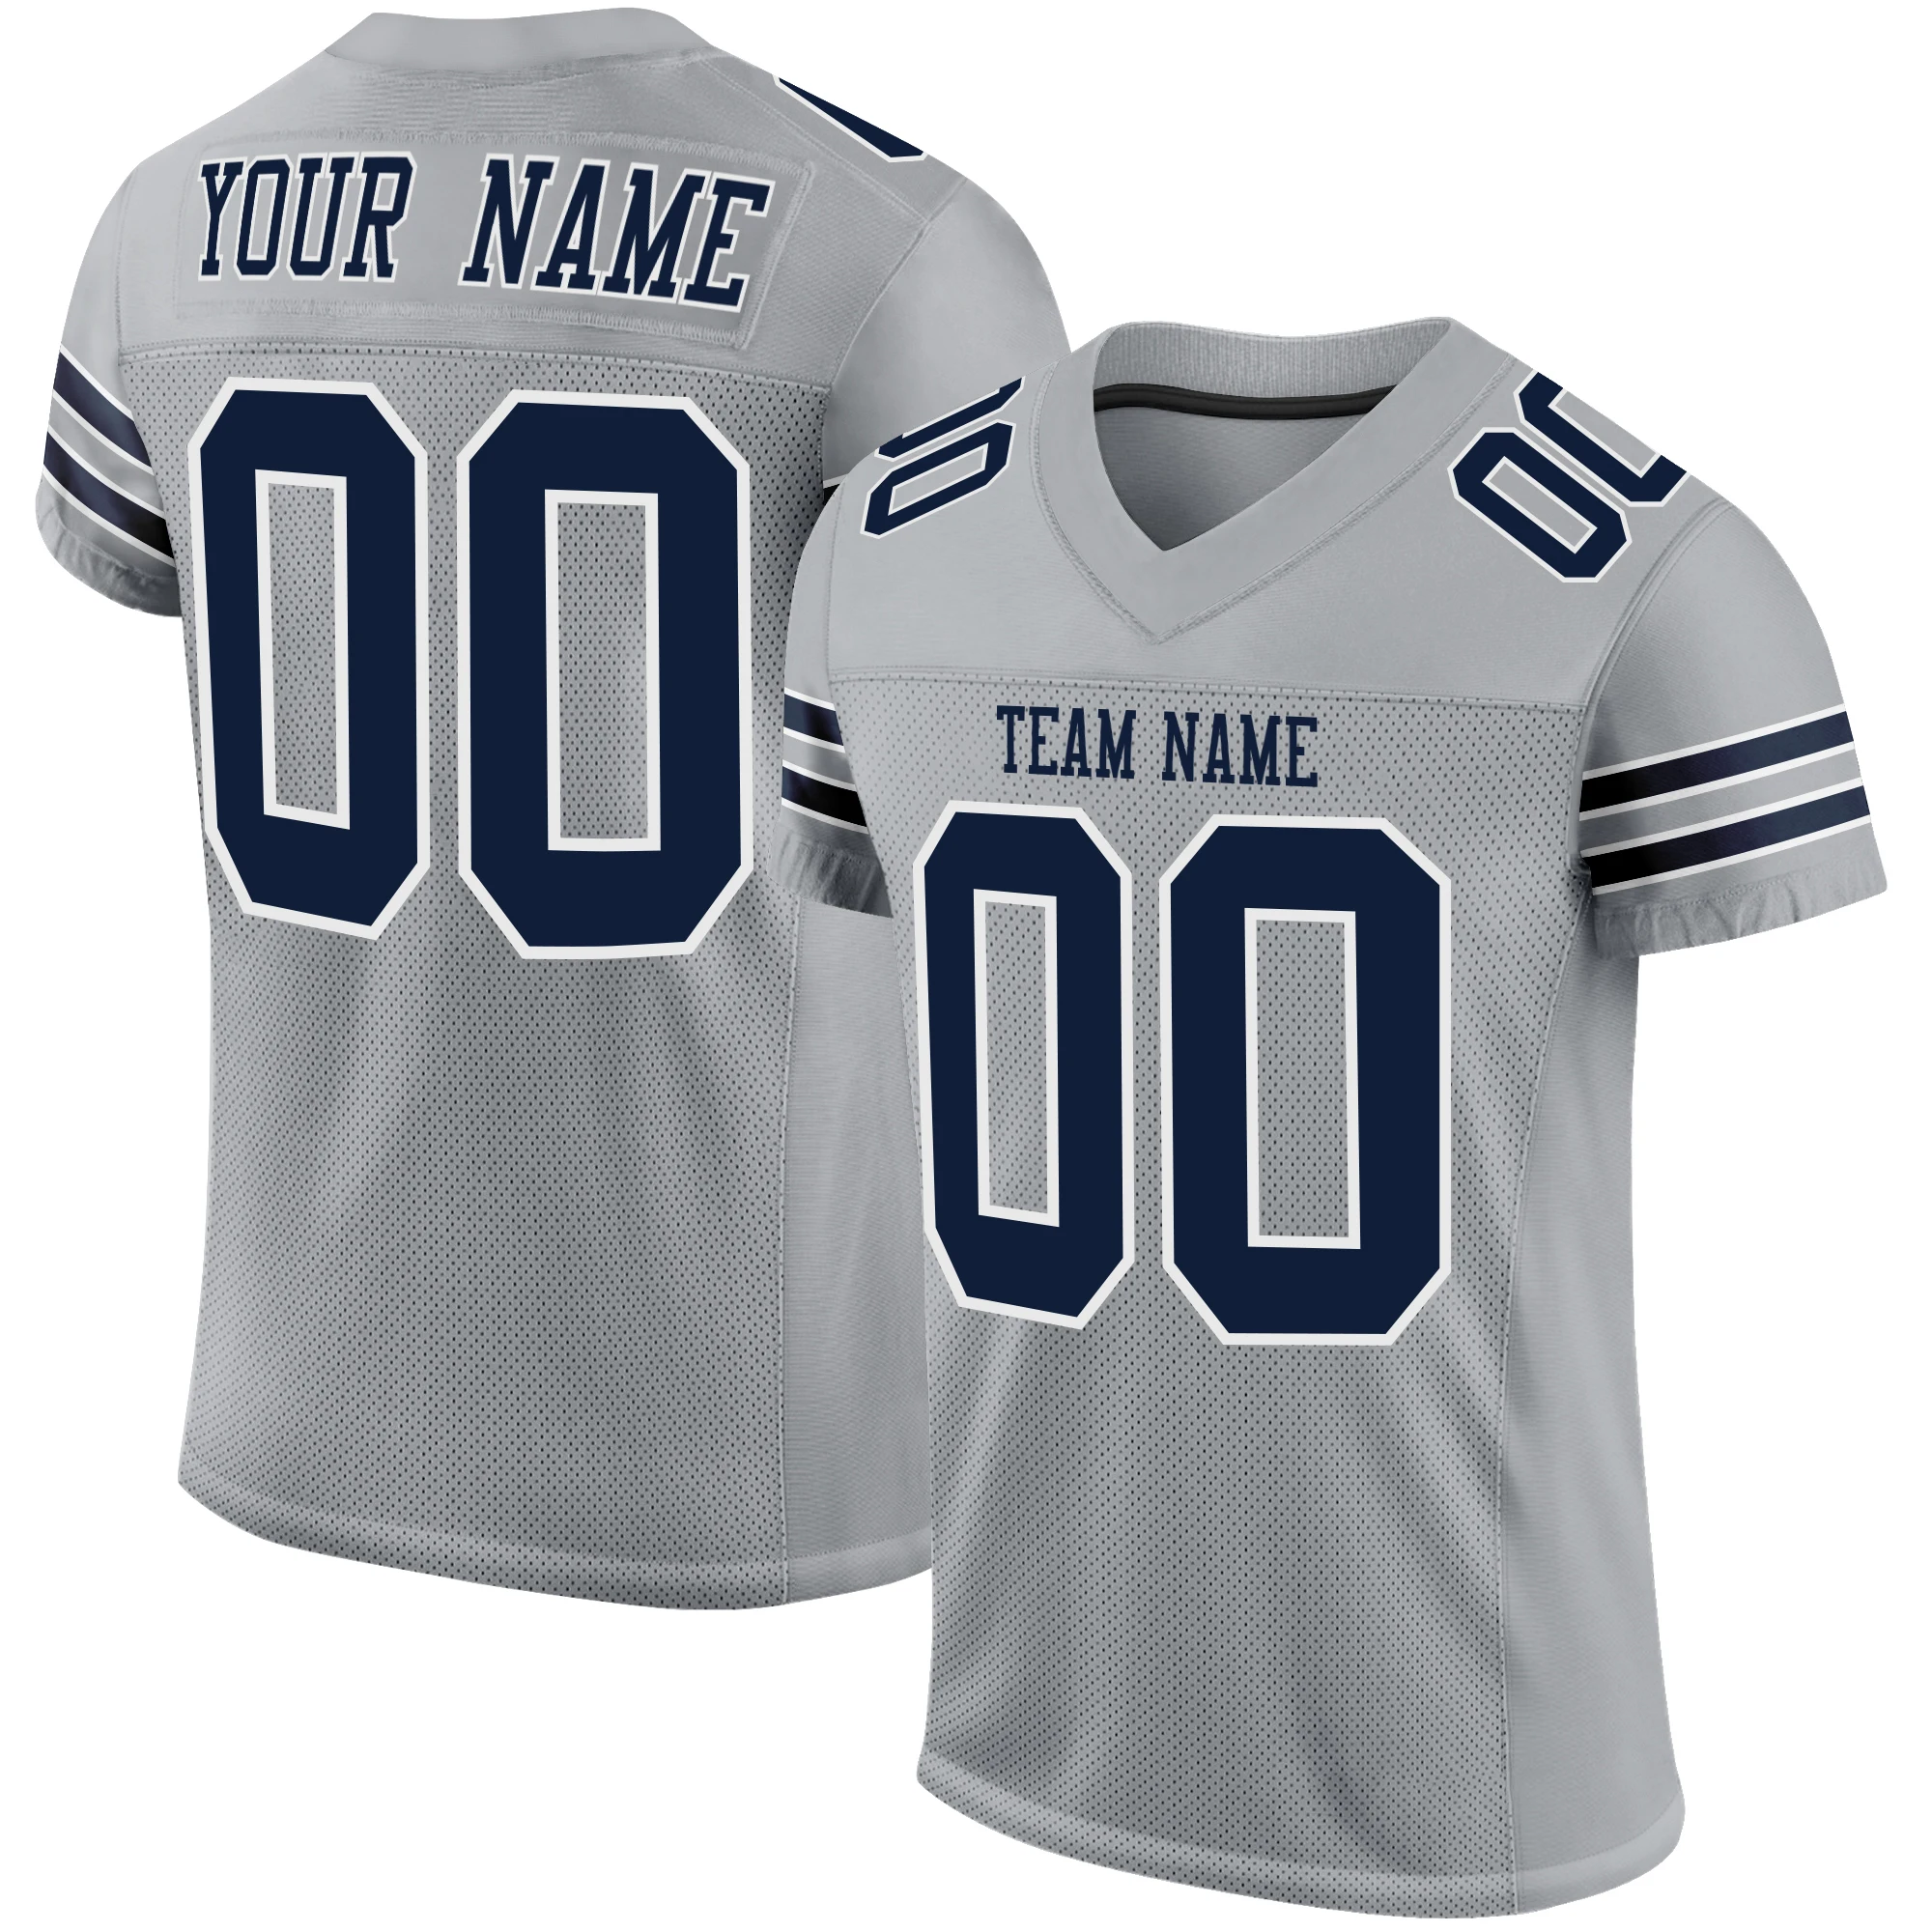 Personalized Custom American Football Jersey Sublimation Printing Team Name/Number Football Shirt Fan Gift Rugby Jersey for Men